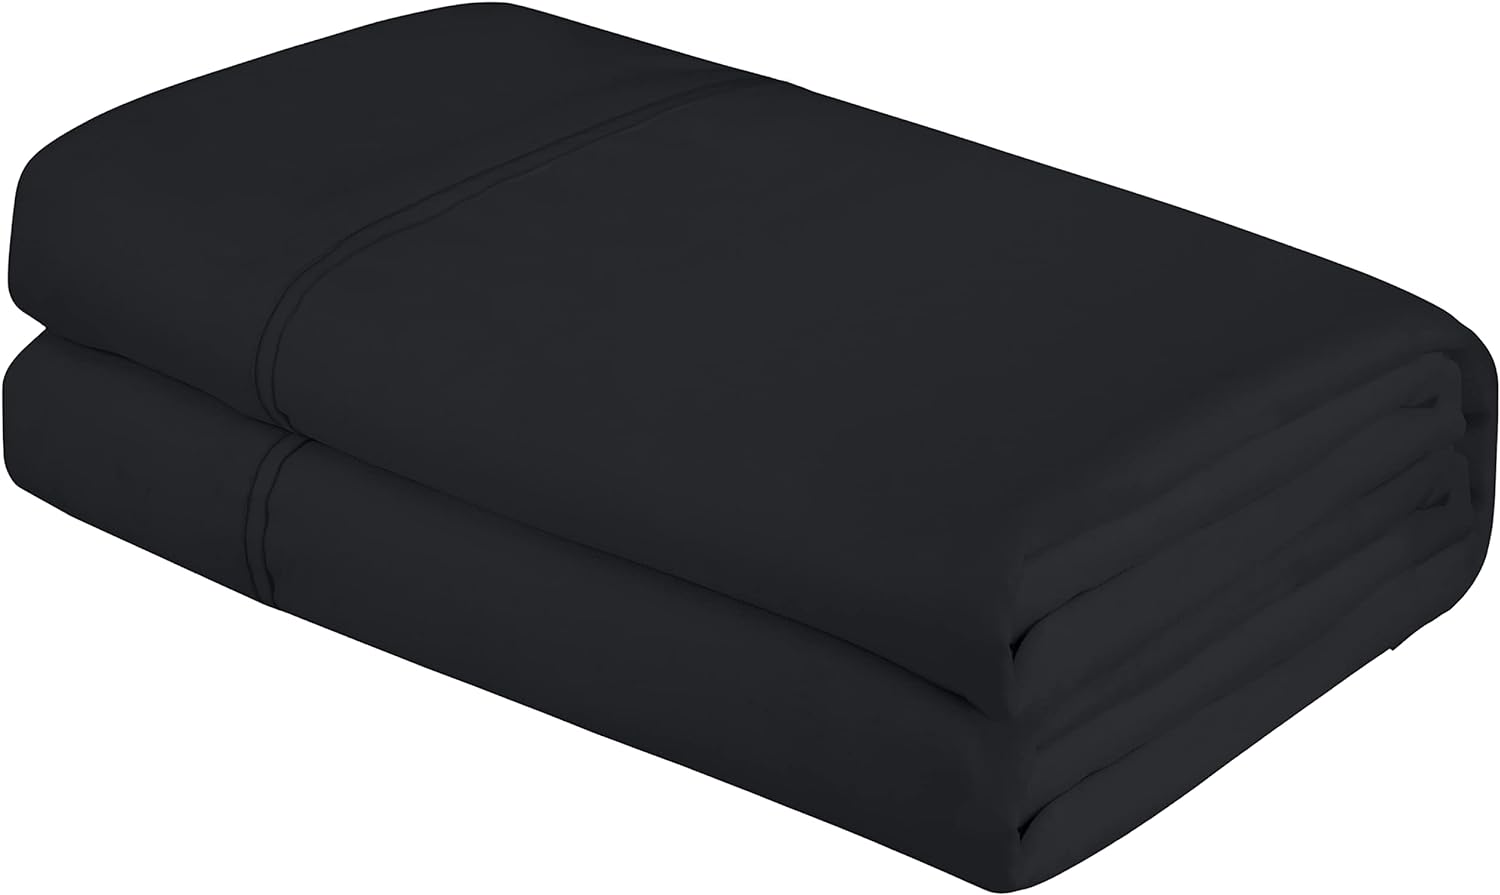 Royale Linens Full Size Flat Sheet Only - Brushed 1800 Microfiber - Ultra Soft & Breathable - Wrinkle & Stain Resistant - Hotel Quality Flat Sheet Sold Separately - Top Sheet for Bed - (Full, Black)